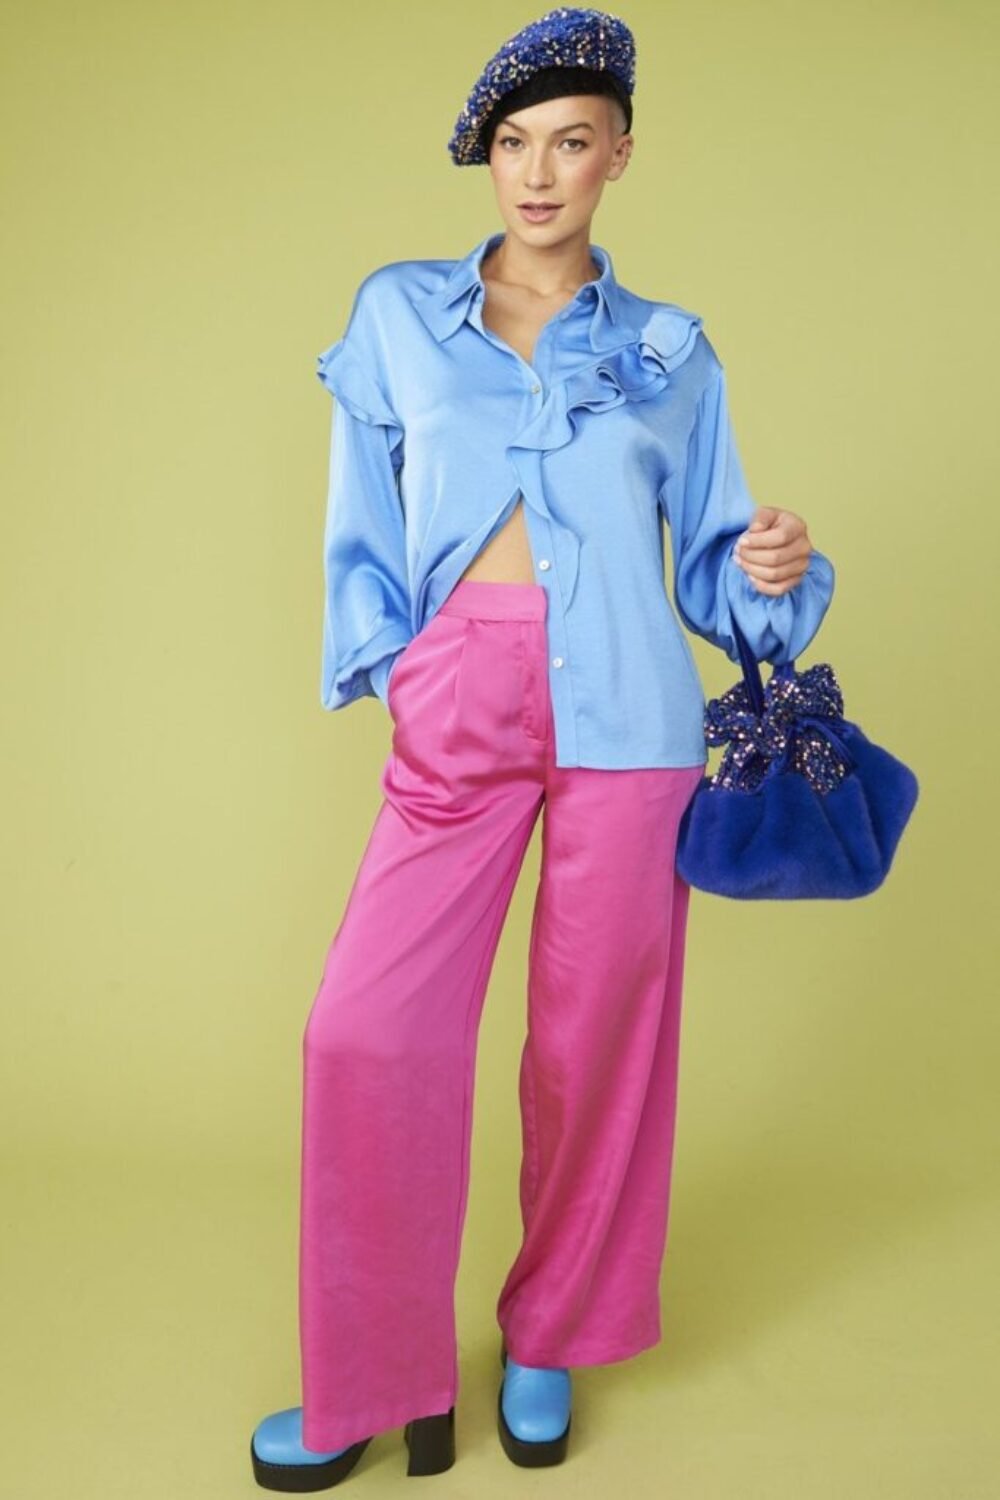 Shop Lux Blue Rayon Blend Ruffle Blouse and women's luxury and designer clothes at www.lux-apparel.co.uk